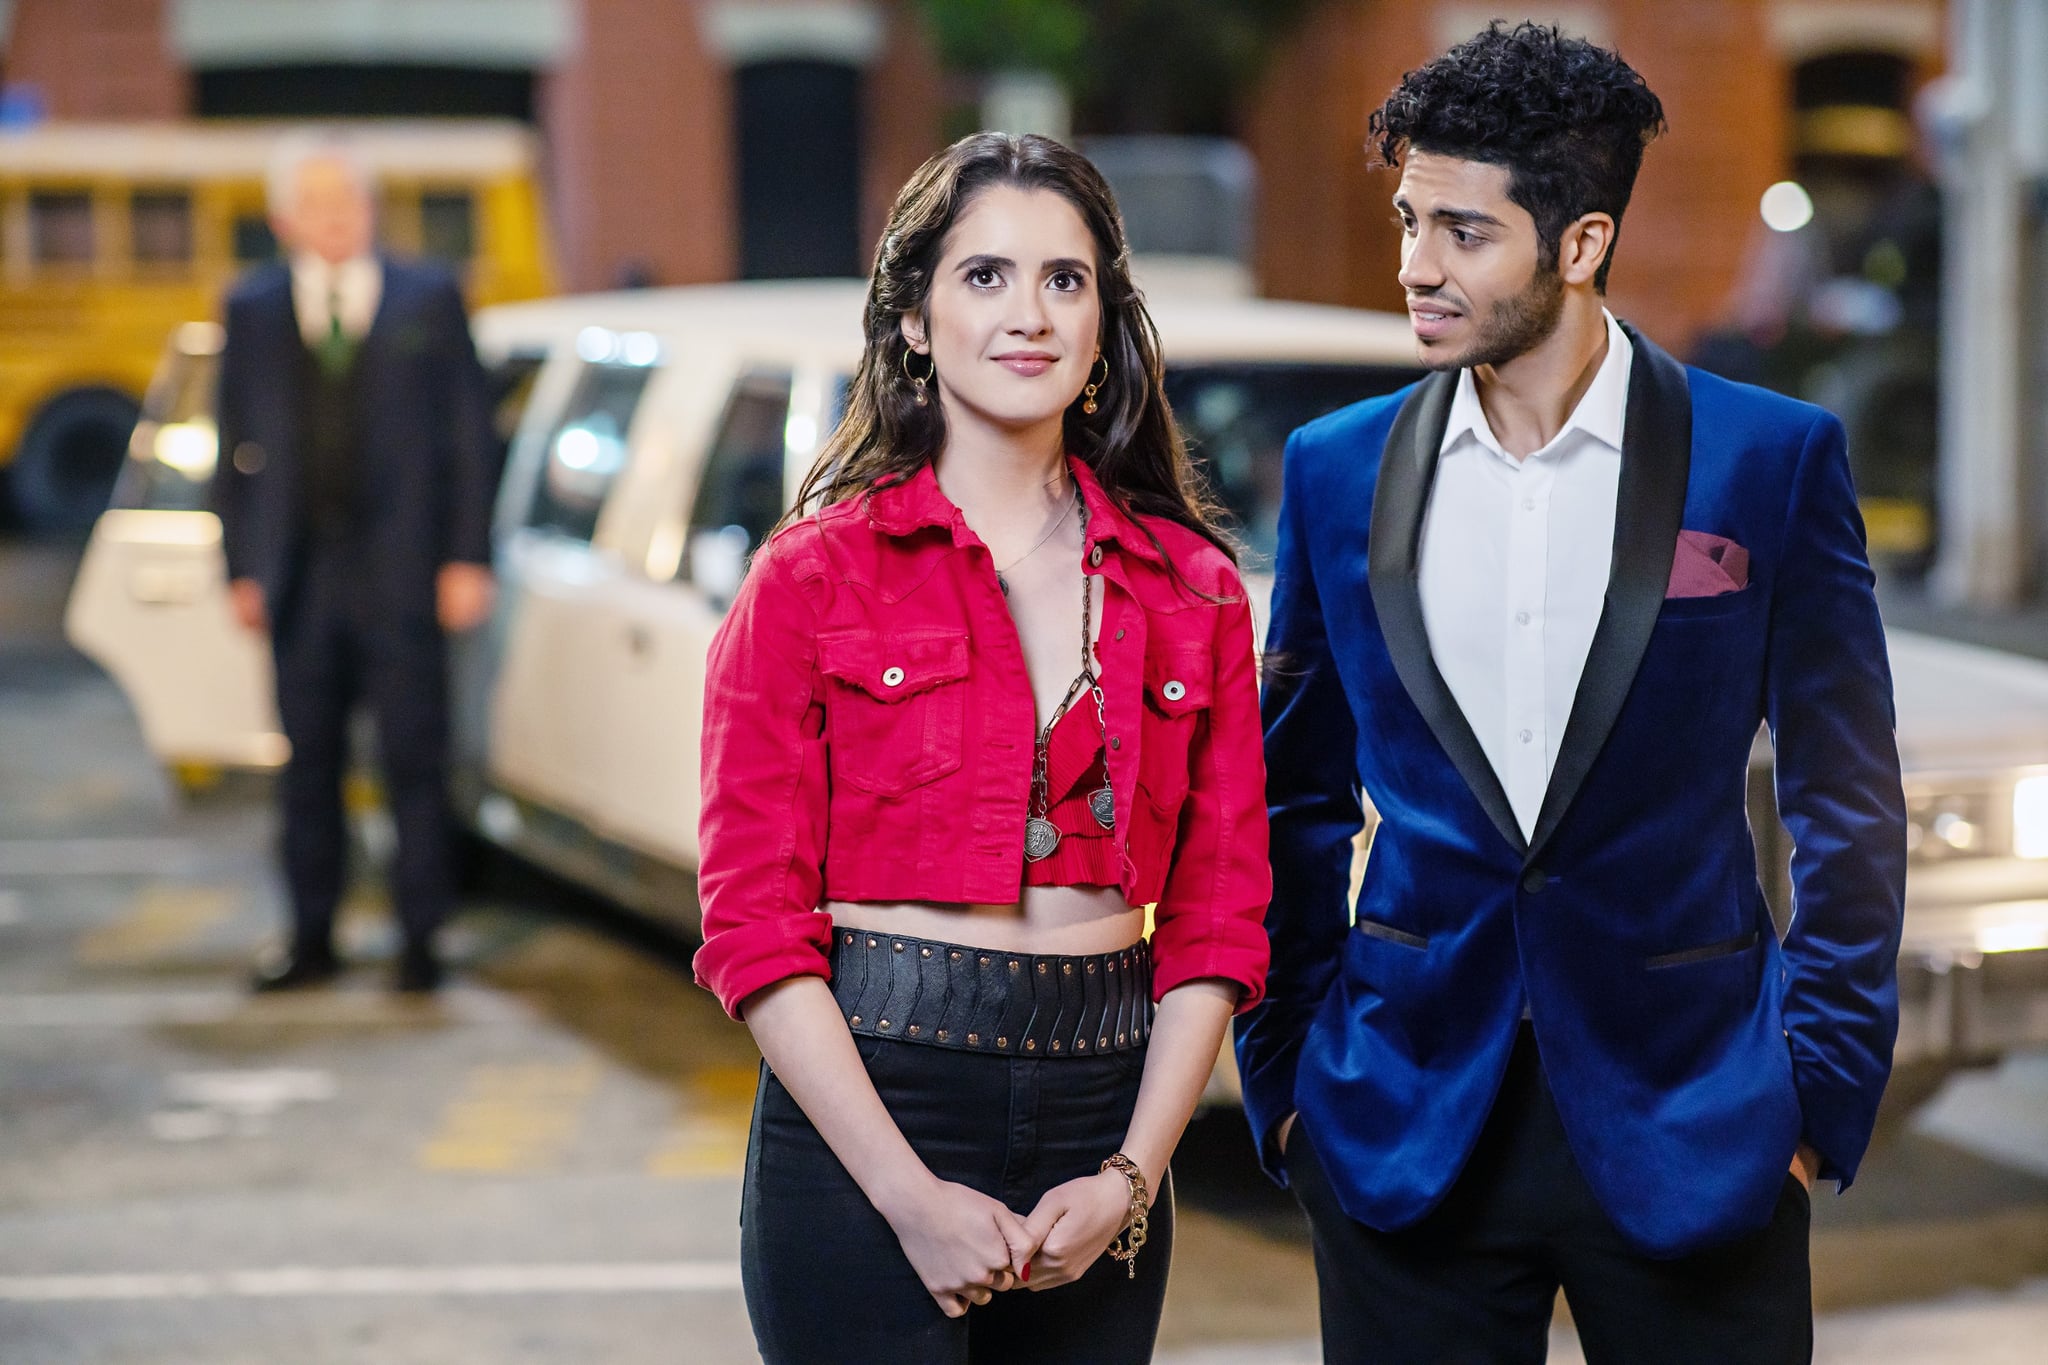 THE ROYAL TREATMENT, from left: Laura Marano, Mena Massoud, 2022. ph: Kirsty Griffin /  Netflix / Courtesy Everett Collection